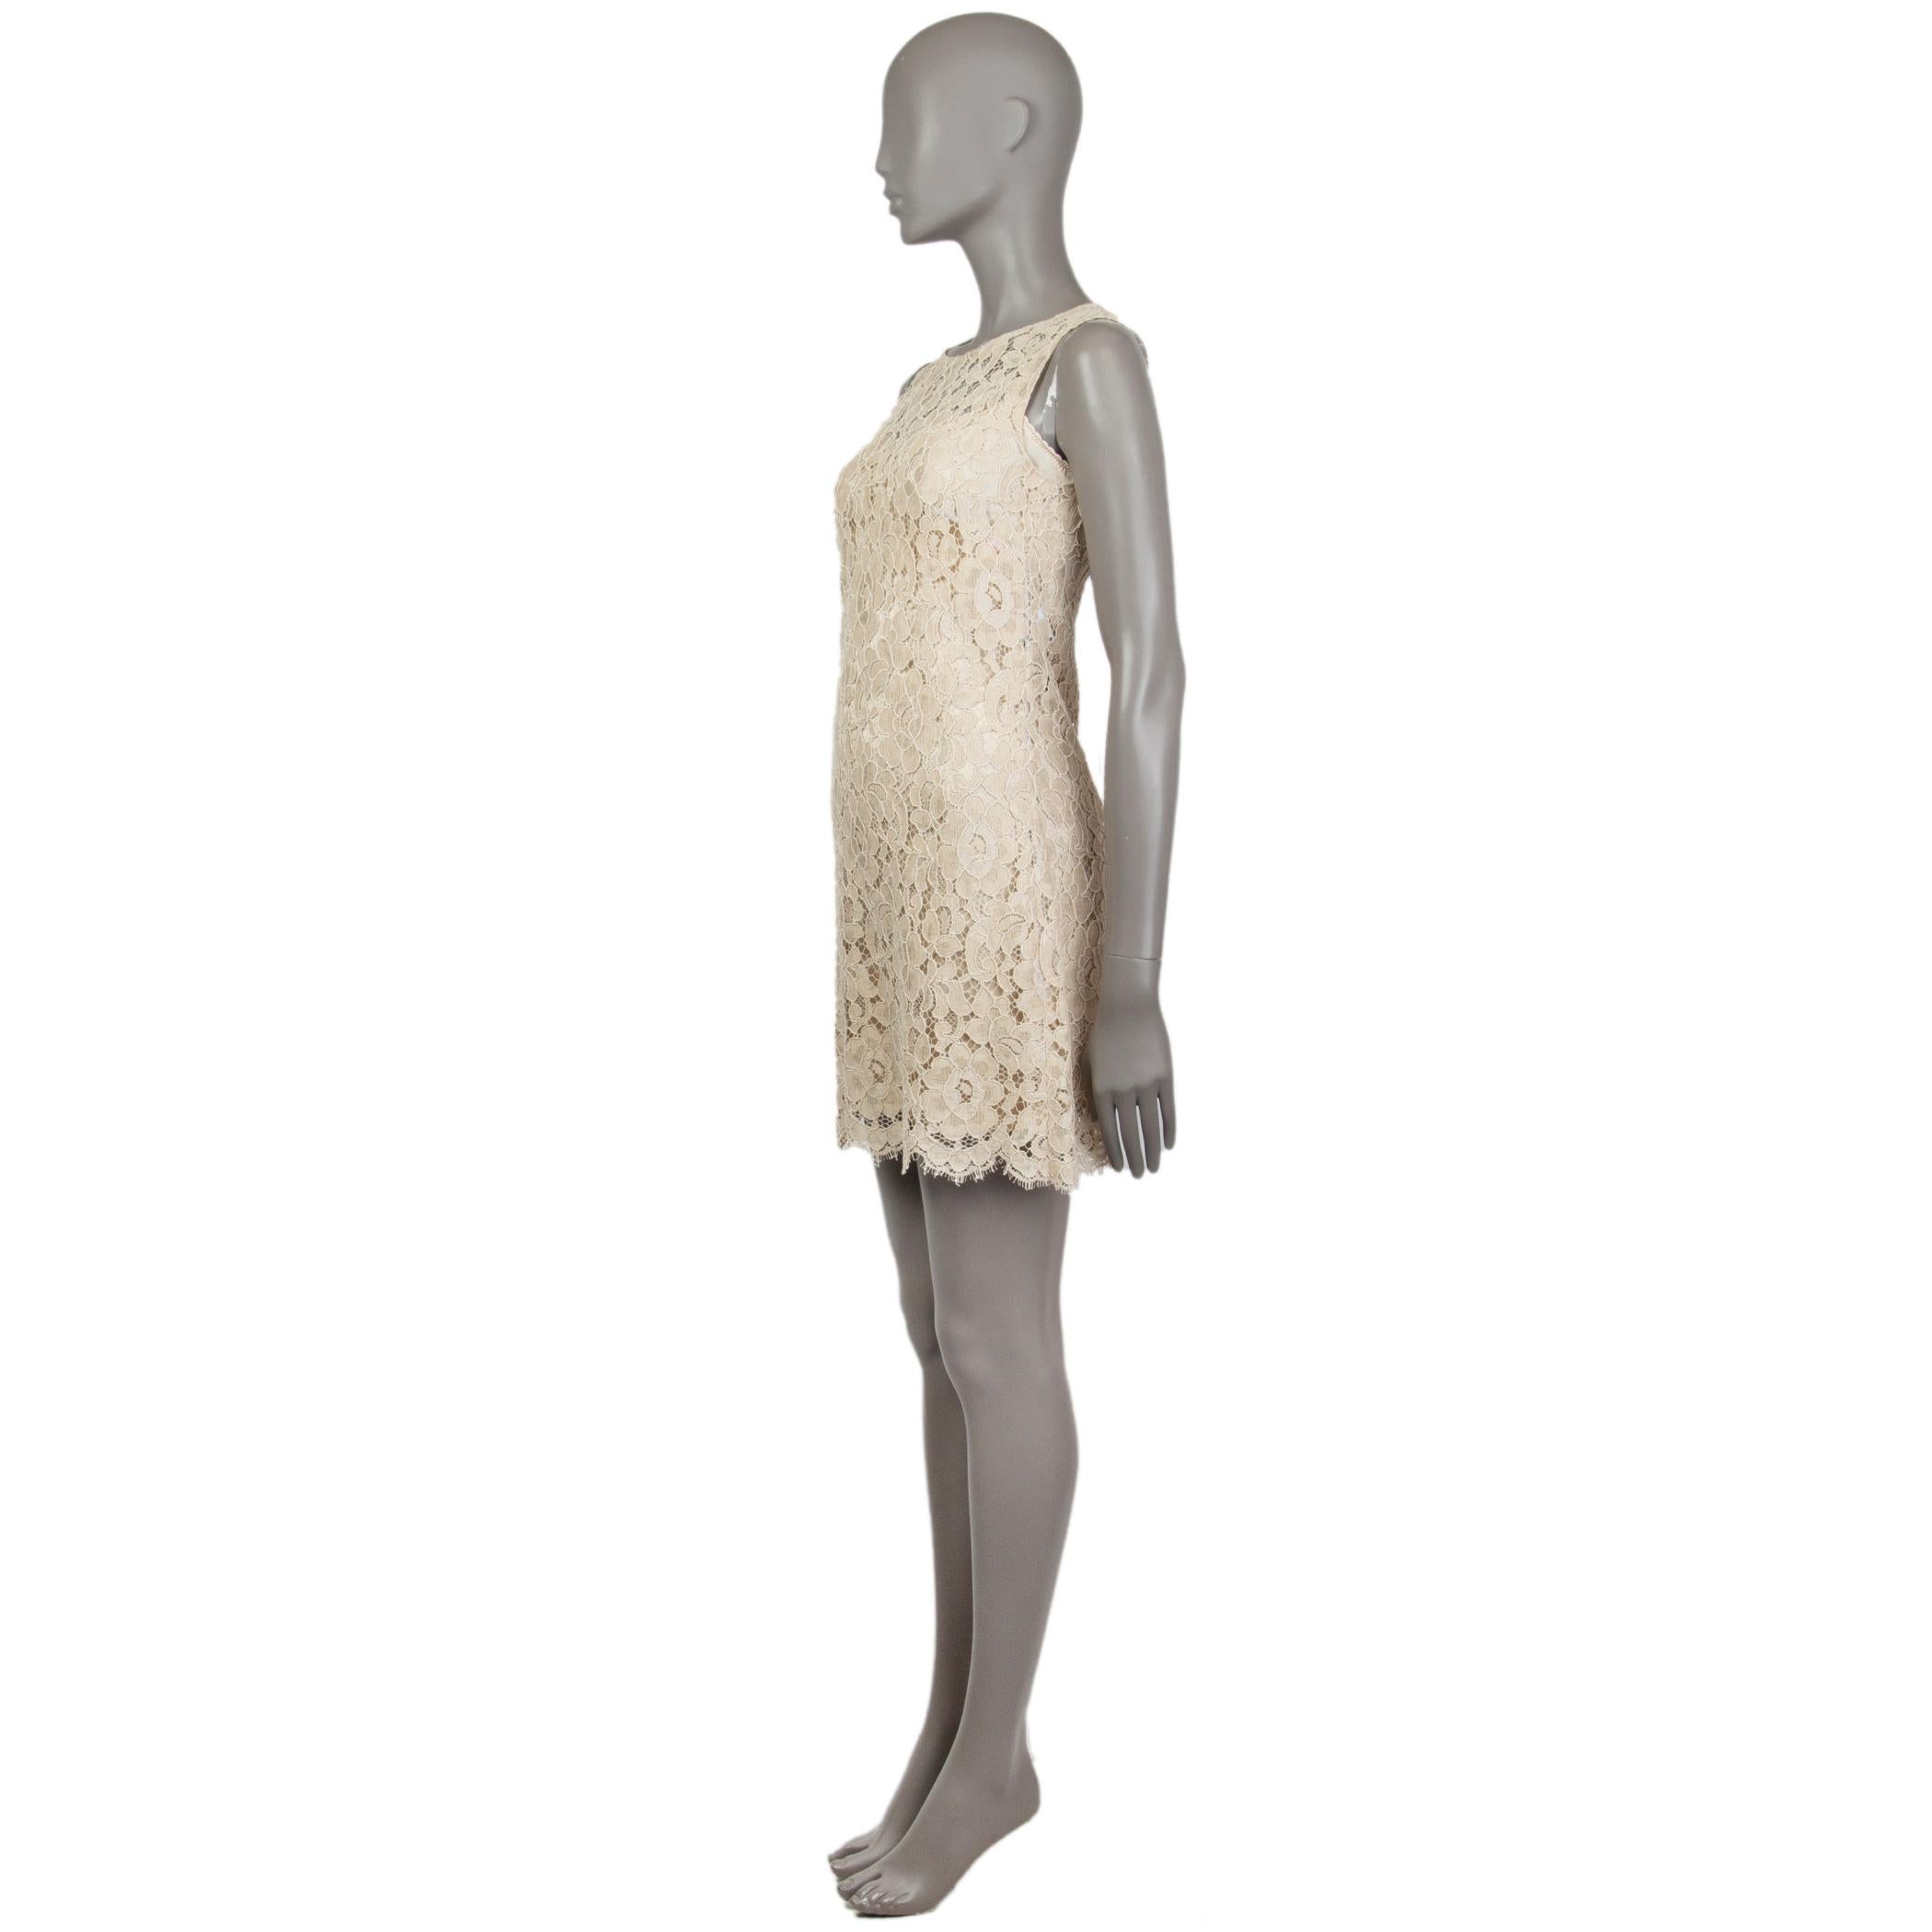 Dolce & Gabbana lace shift dress in beige, cotton (90%) and nylon (10%). Closes with consealed metal zipper on the back. Comes with slip dress in beige silk (96%) and elastane (4%). Has been worn in excellent condition. 

Tag Size 40
Size S
Bust